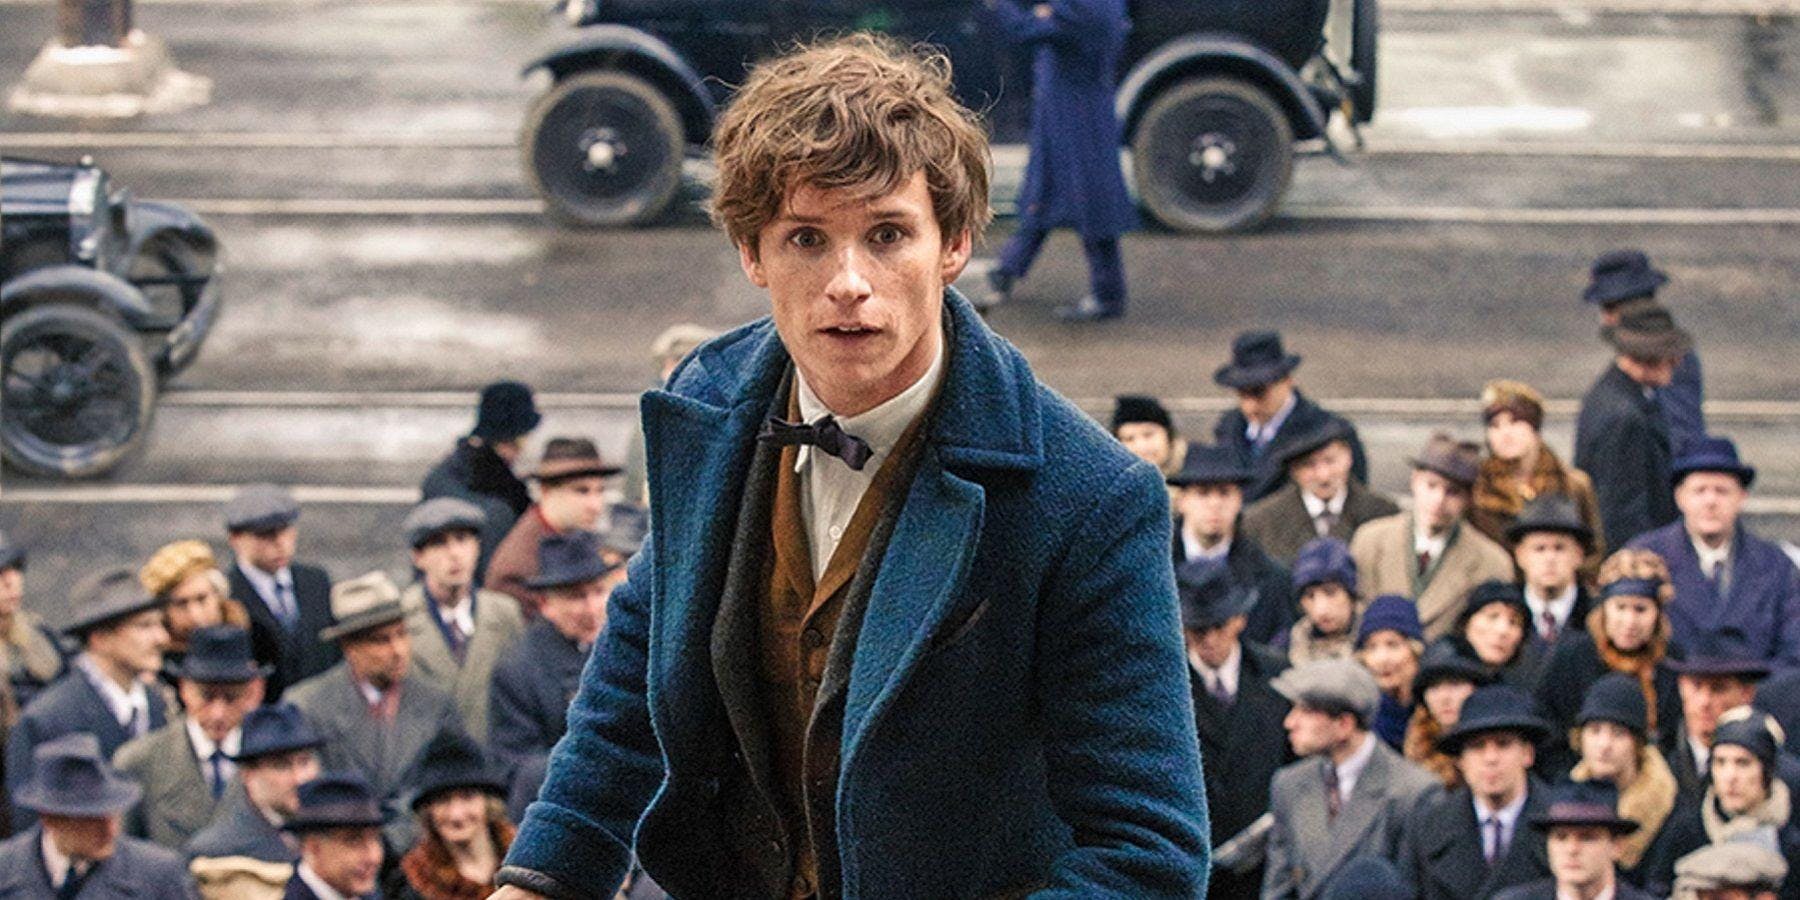 This is a story of how NOT to get a role. Eddie Redmayne was trying to land a role in Star Wars so he recited a fragment of Pride and Prejudice" he was given, in a Darth Vader voice. Not very original.